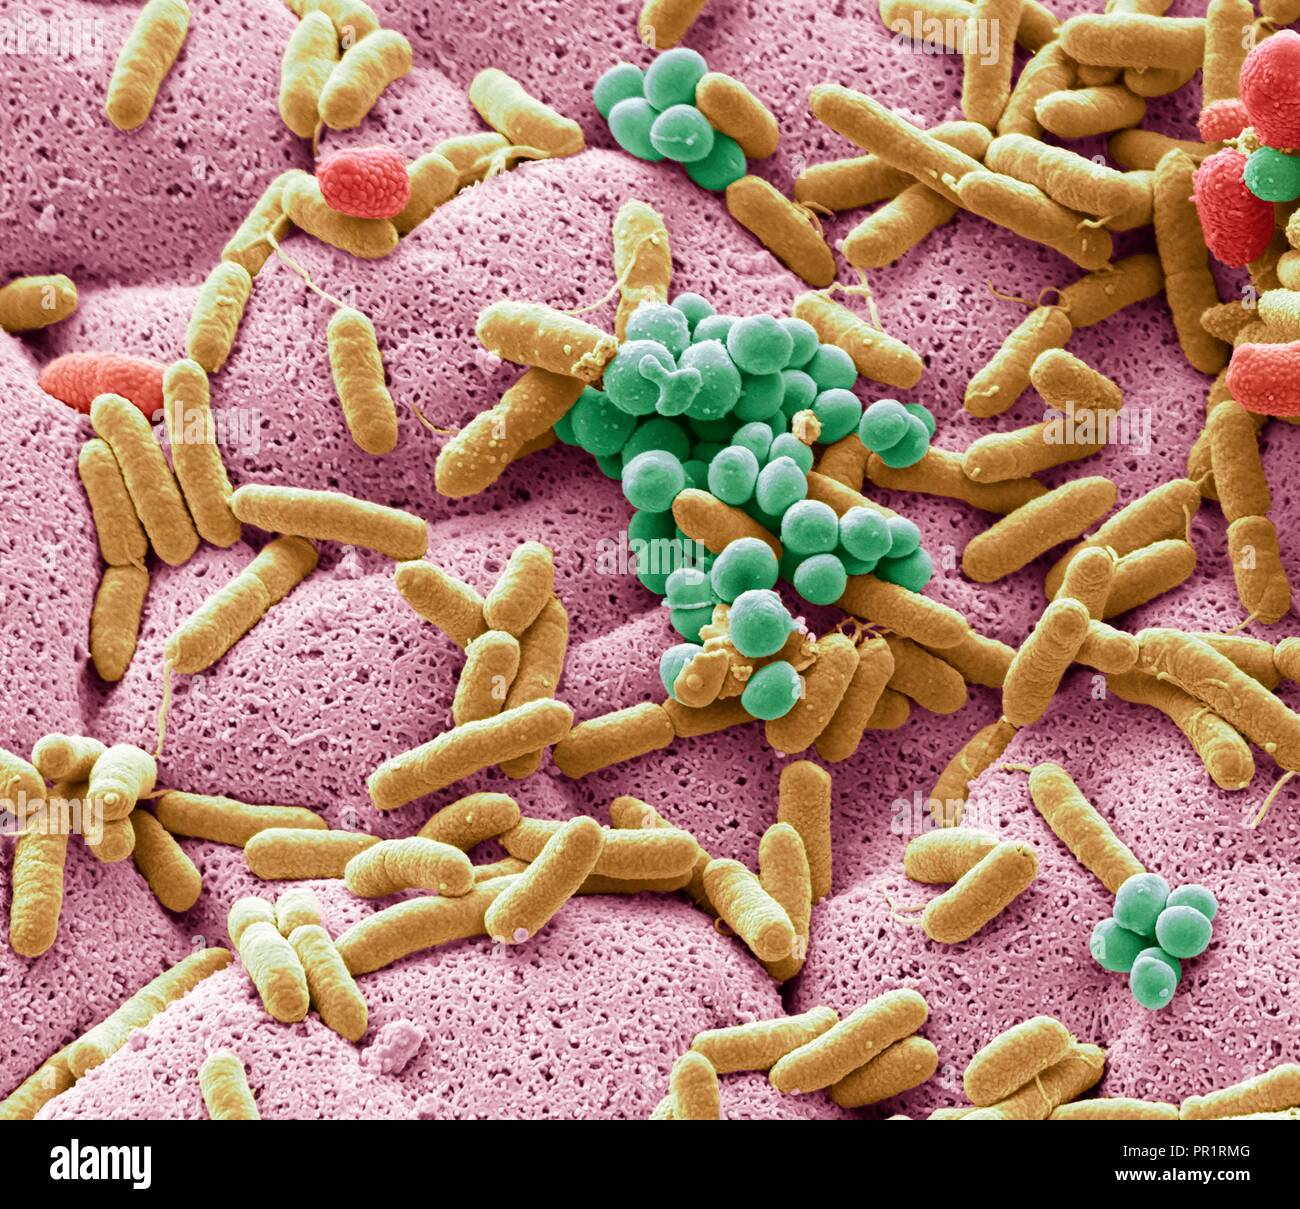 Coloured scanning electron micrograph (SEM) of bacteria cultured from a used dishcloth. Dishcloths can have six times as many bacteria as toilet handles according to some studies. They often harbour harmful E. coli bacteria, which can cause diarrhoea that can be fatal in vulnerable people. Many people fail to clean their dishcloth at a high enough temperature to kill commonly present bacteria such as Campylobacter, Salmonella, Staphylococcus, E. coli, and Listeria. Magnification: x6500 when printed at 10cm wide. Stock Photo